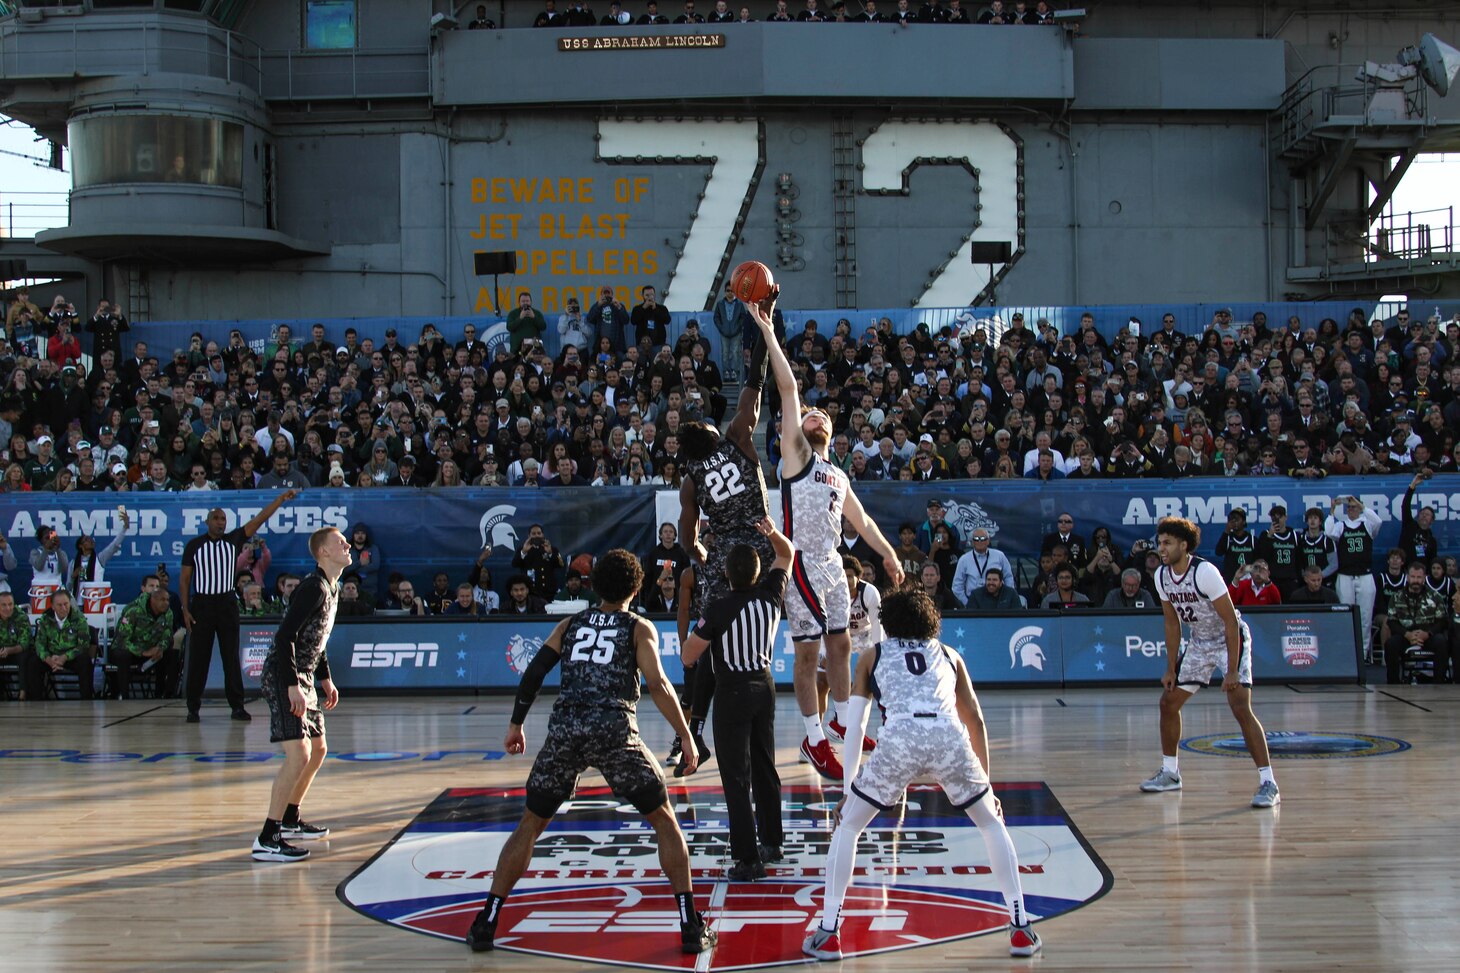 Gonzaga University and Michigan State University compete in the 2022 ESPN Armed Forces Classic – Carrier Edition, aboard USS Abraham Lincoln (CVN 72) at Naval Air Station North Island.